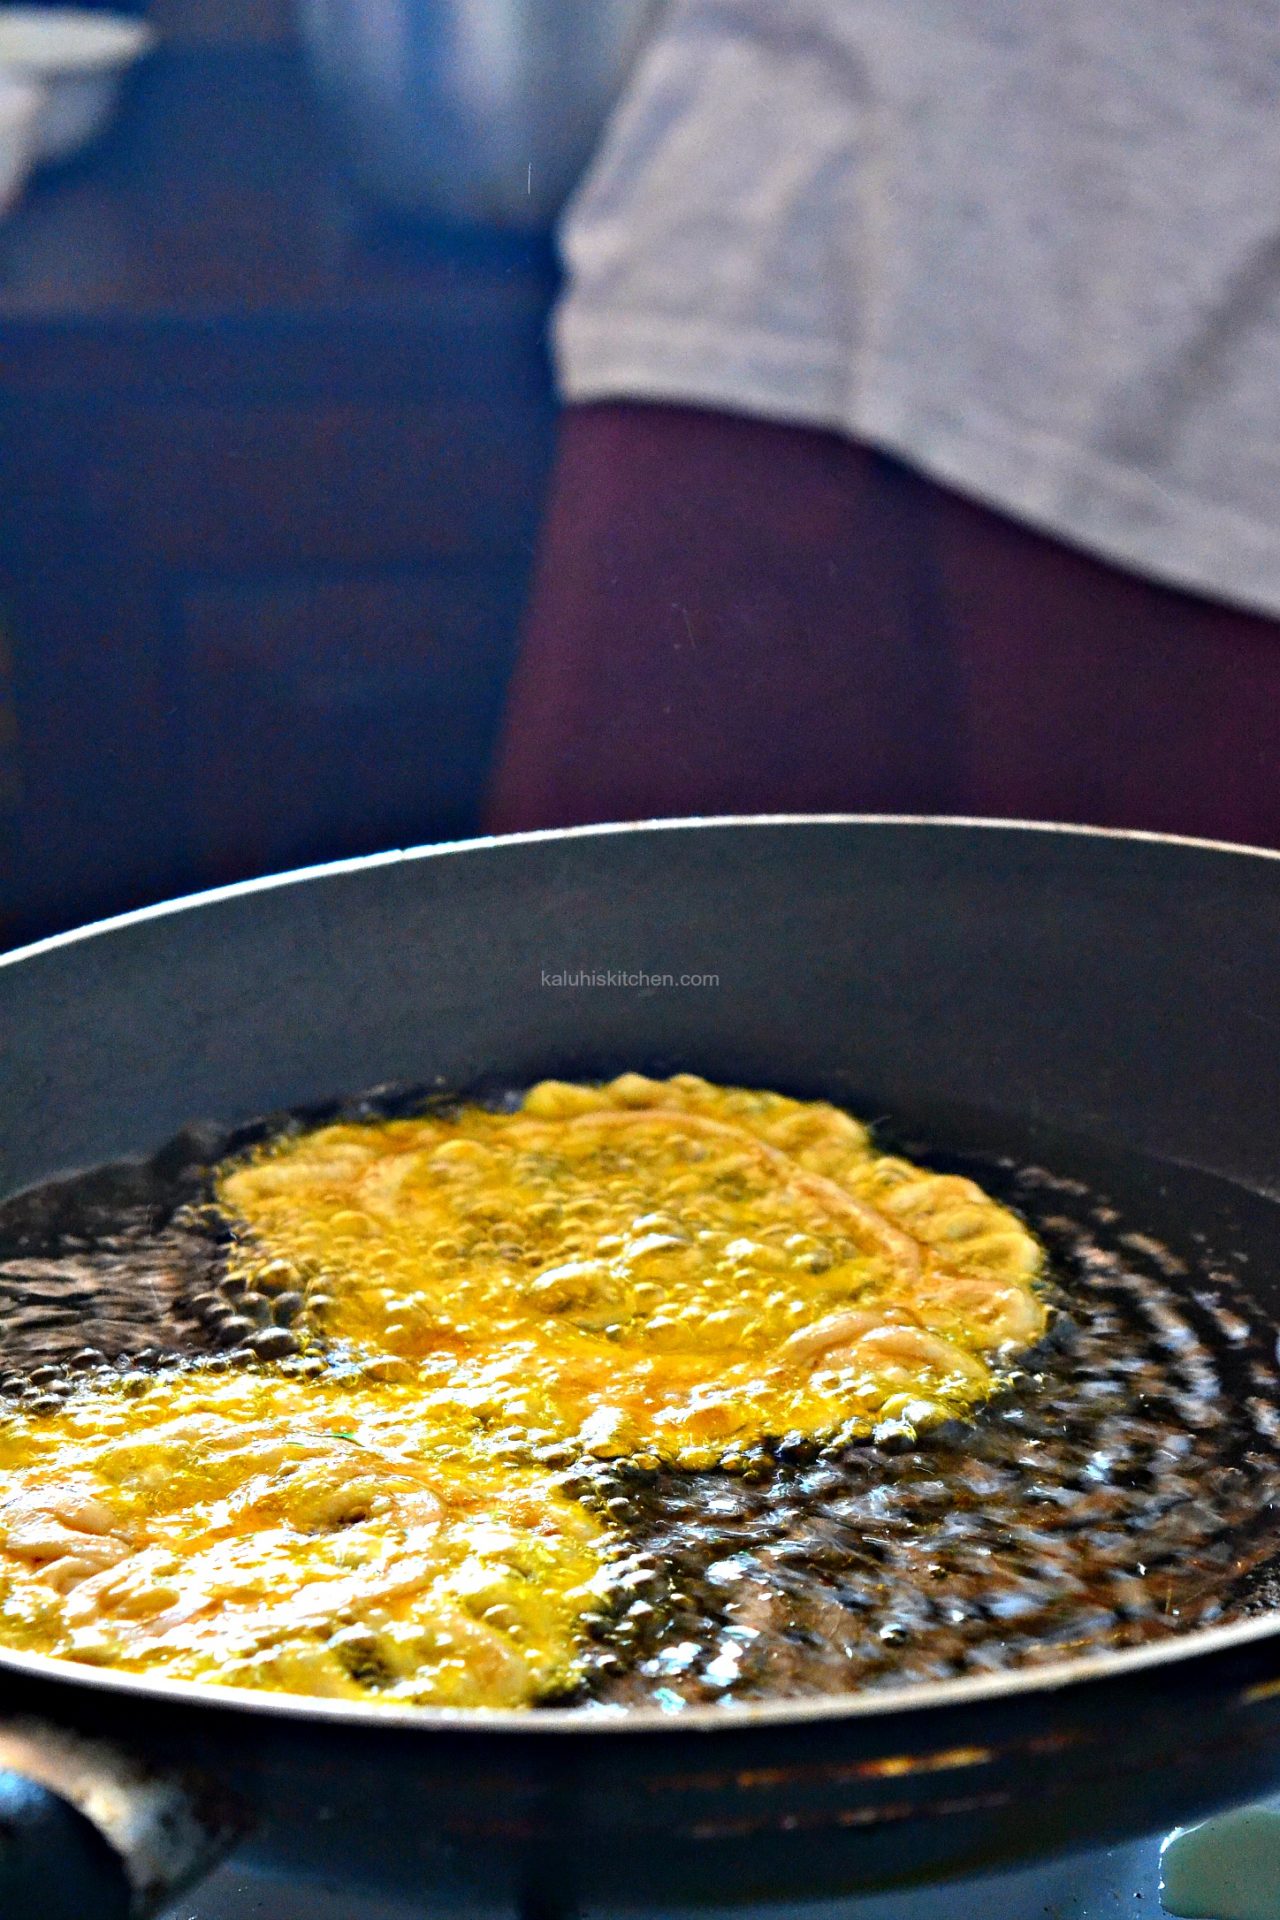 fry the mkate wa mkono for about 5 minutes on each side until they turn golden brown_remove from the heat and serve_kaluhiskitchen.com